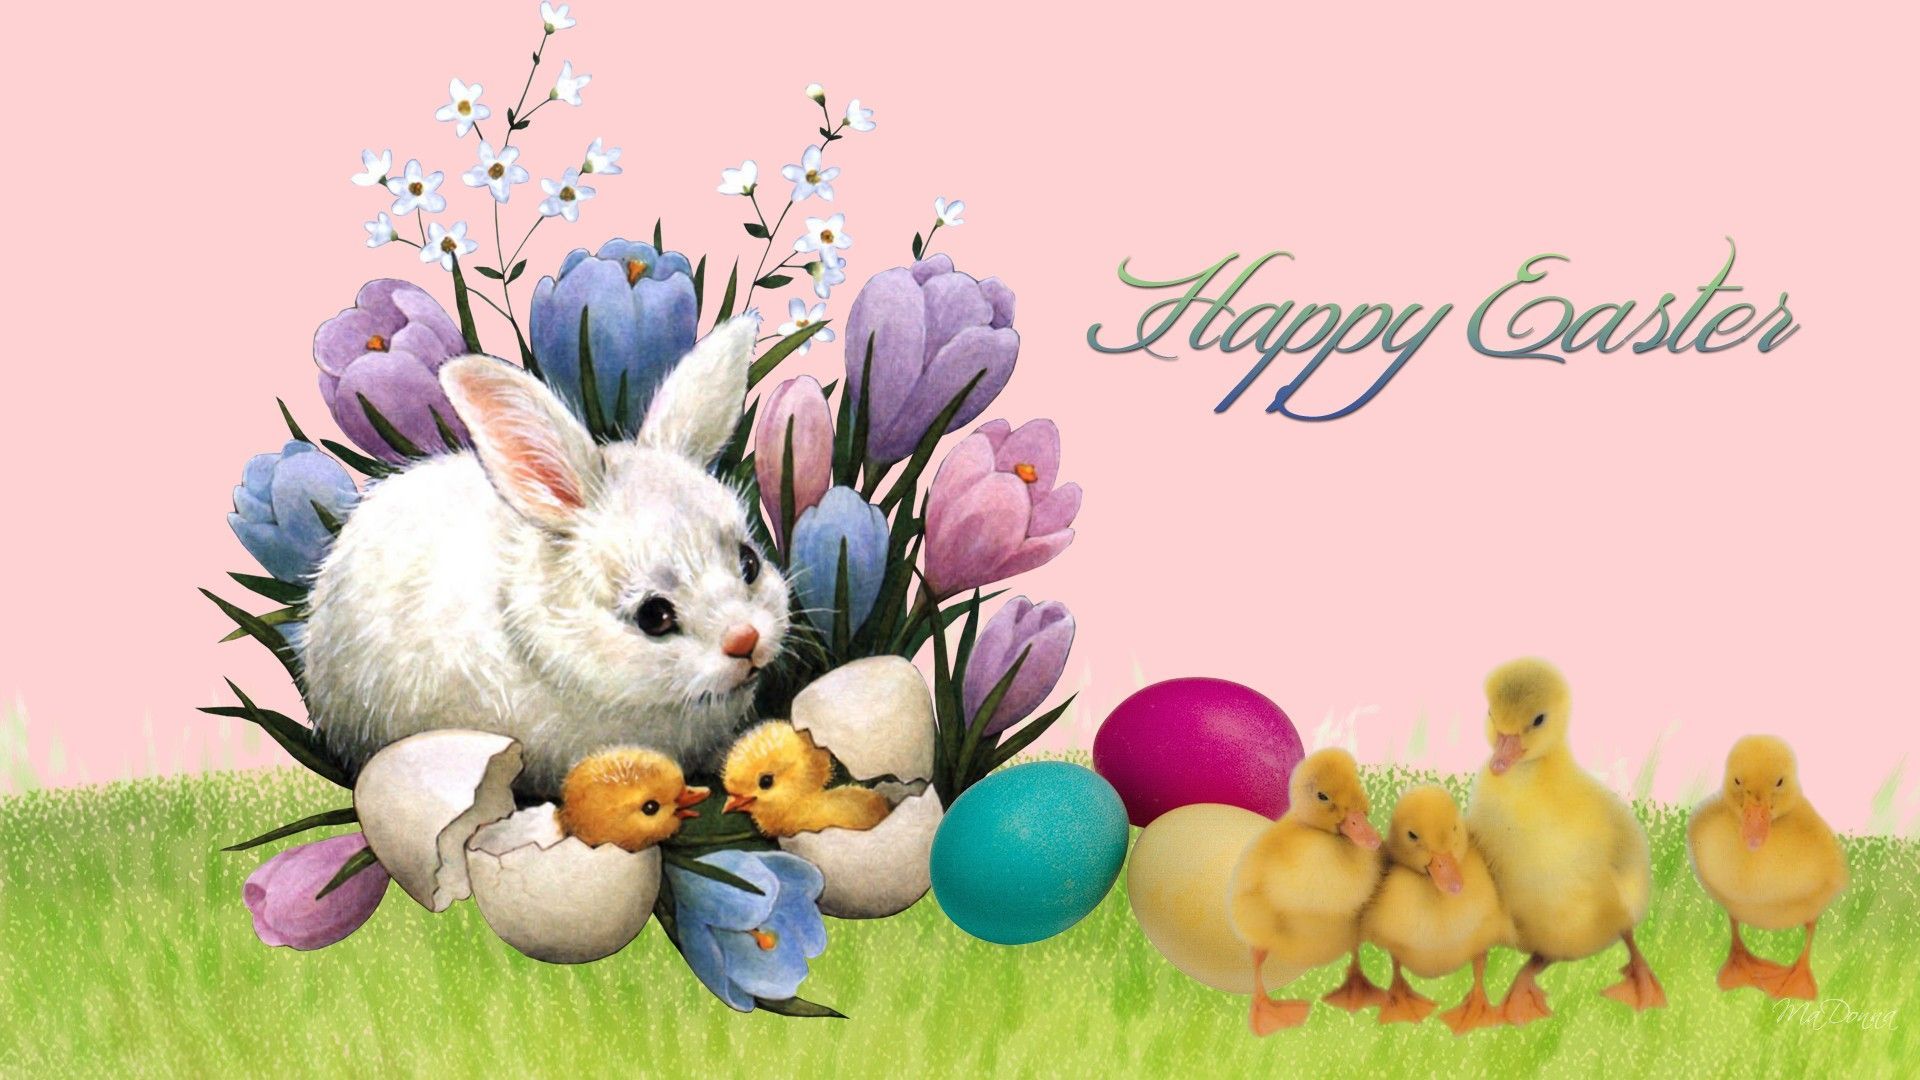 Free Wallpaper Easter Bunny Rabbits Chicks And Bunnies